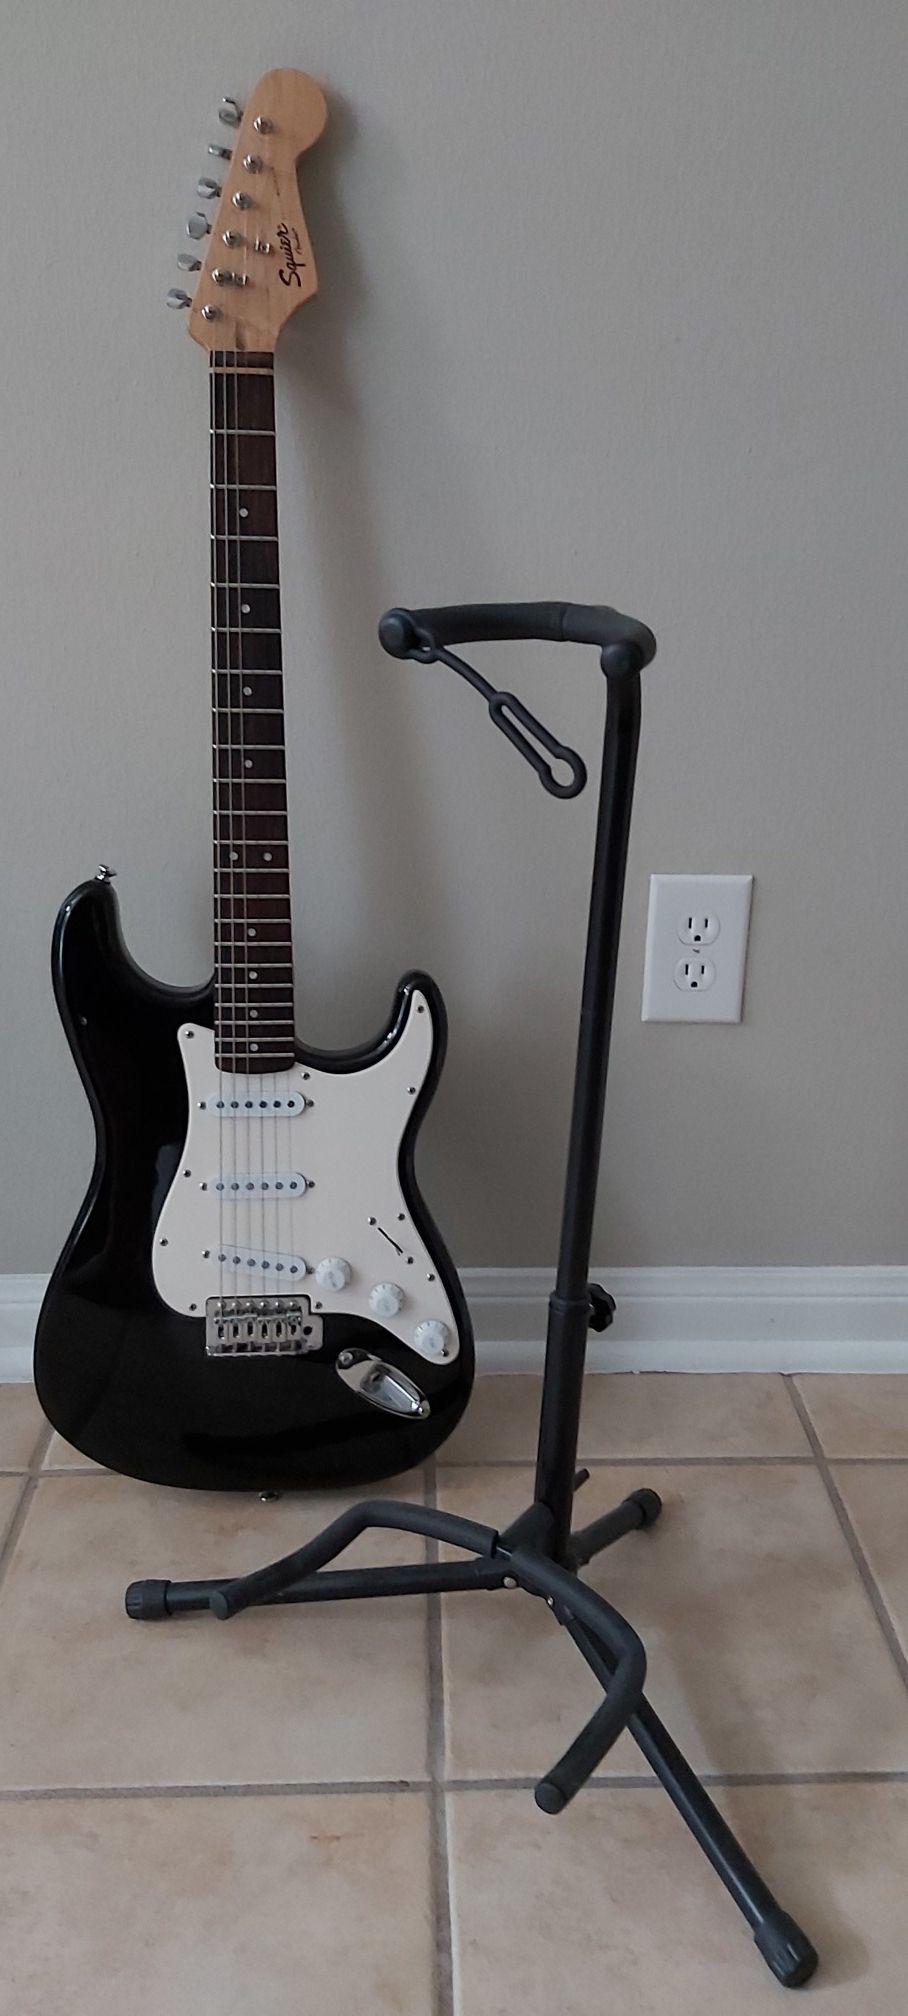 Squier Electric Guitar (with New Stand)